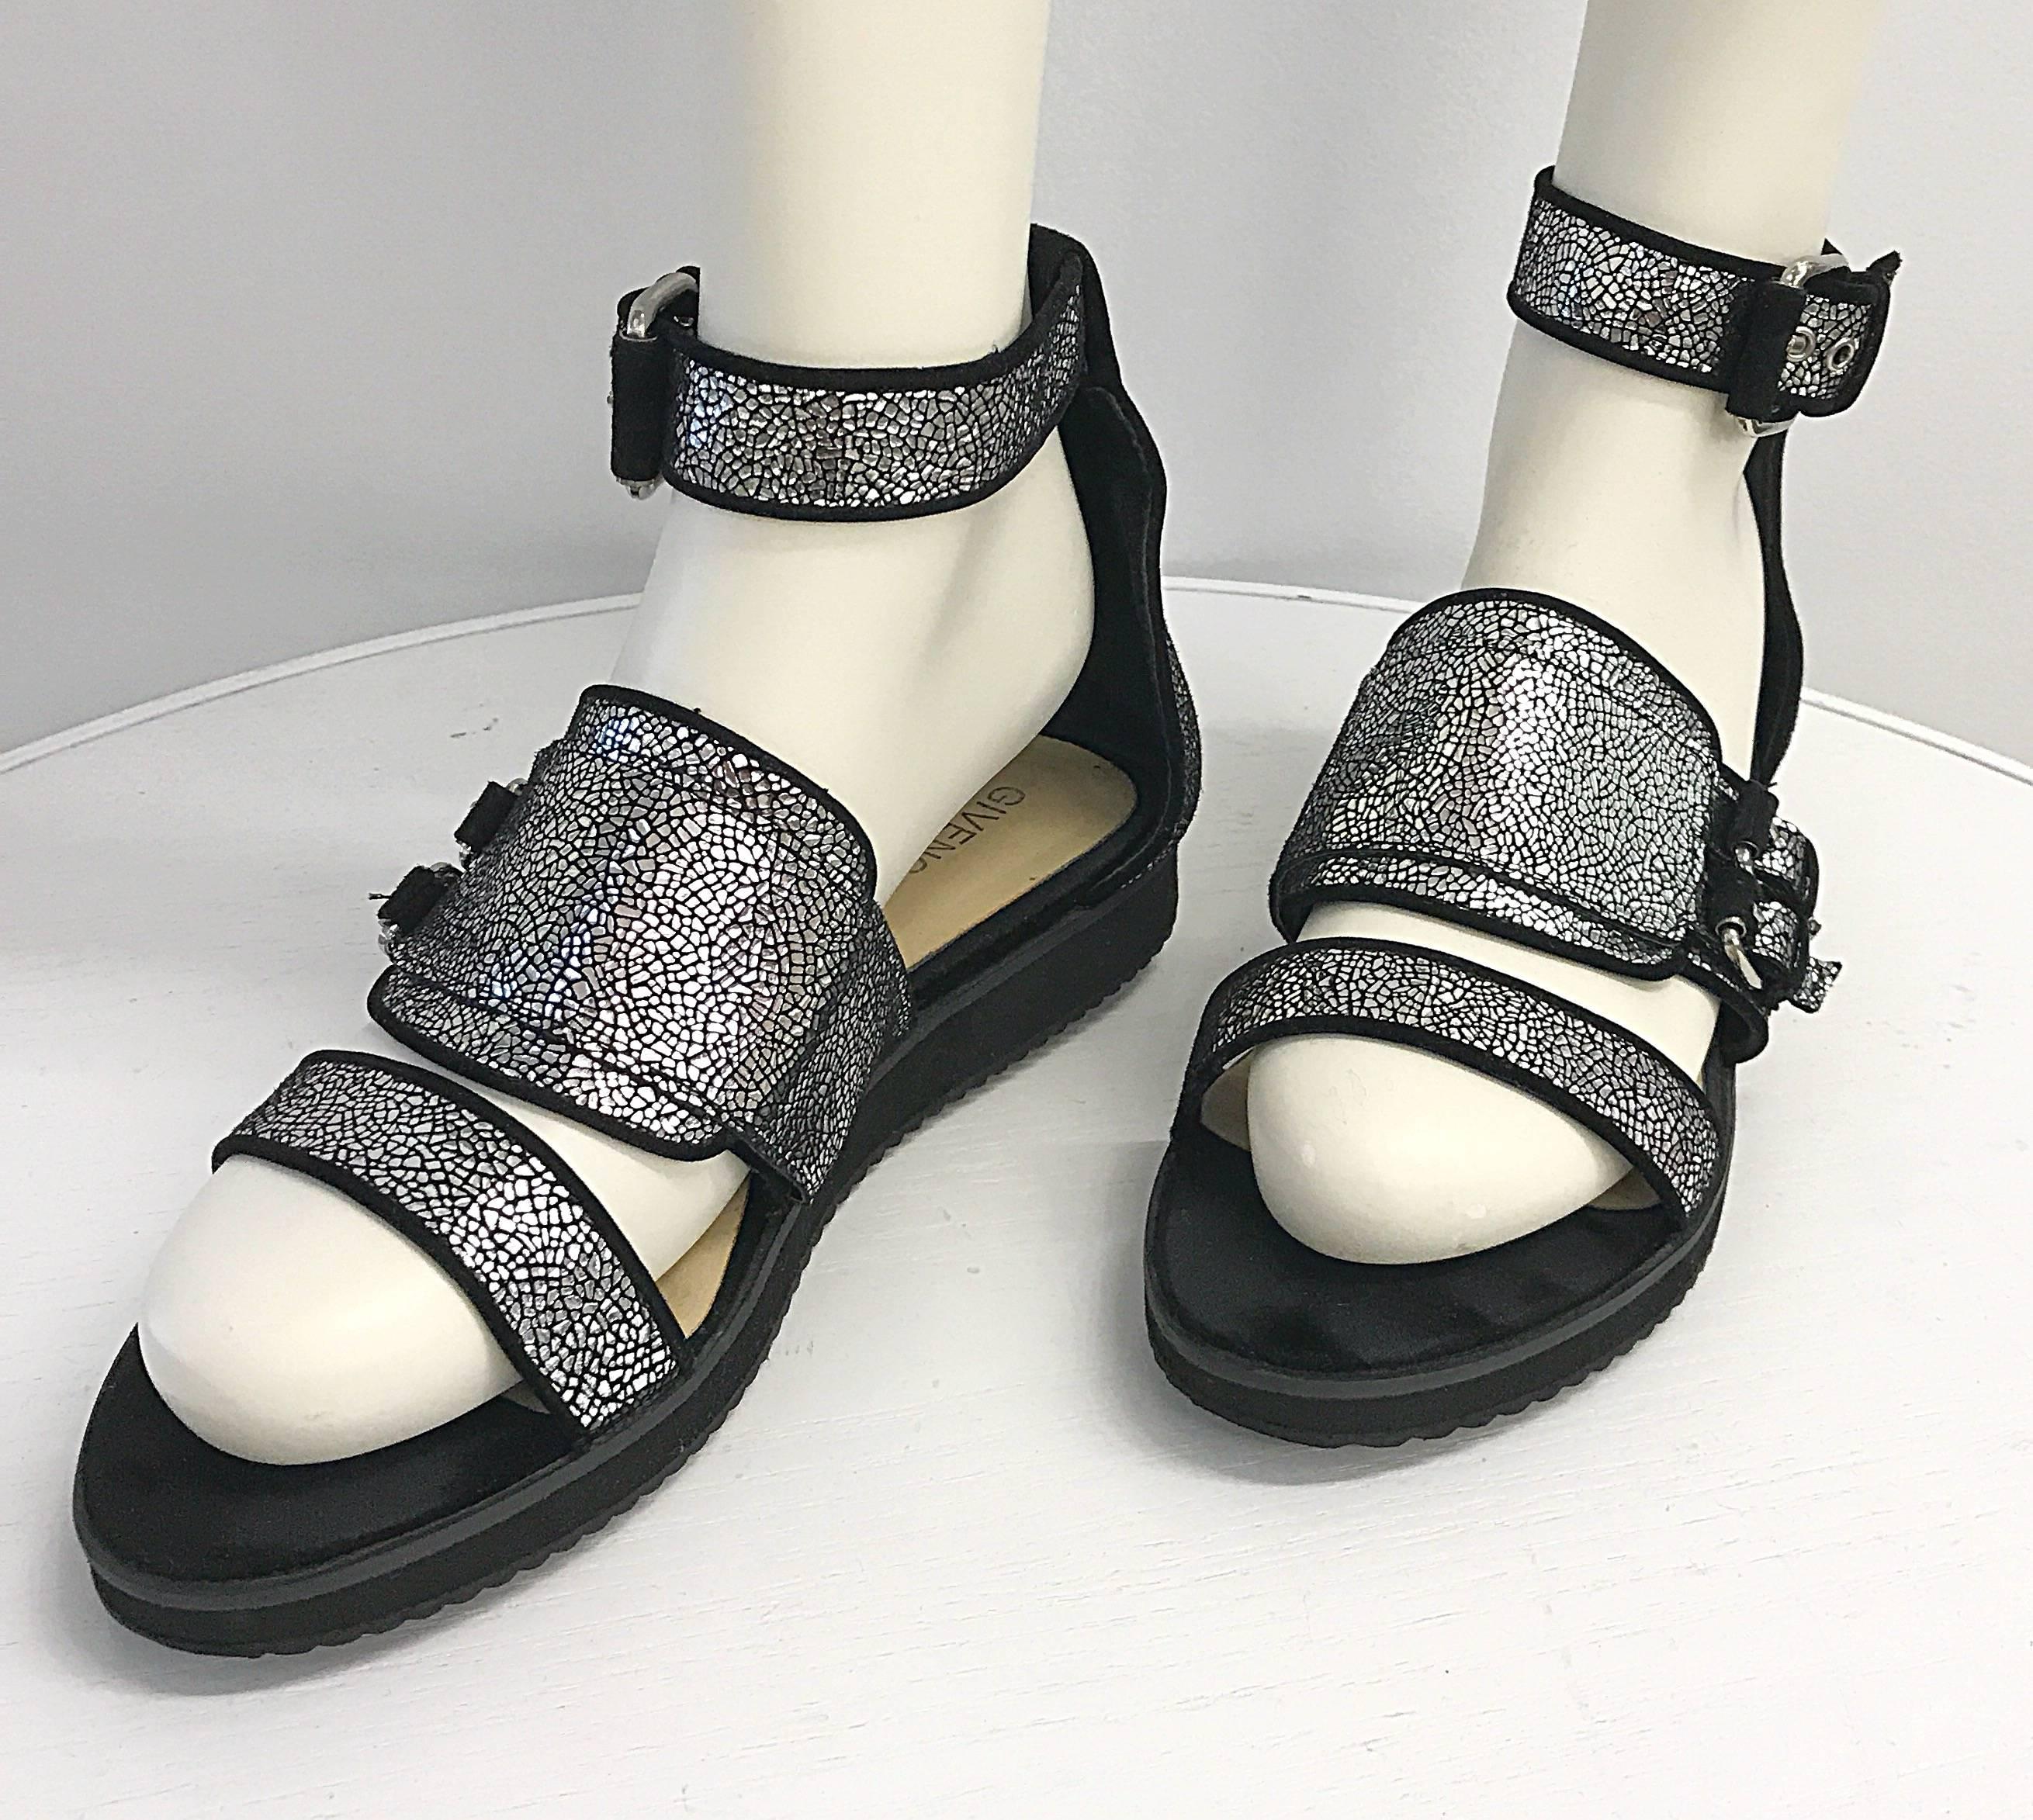 Chic brand new GIVENCHY, by RICARDO TISCI black and silver metallic leather ankle strap sandals! Features distressed leather straps, and a ribbed rubber sole. Adjustable buckle straps. Extra special, as they come from Tisci's last season as head